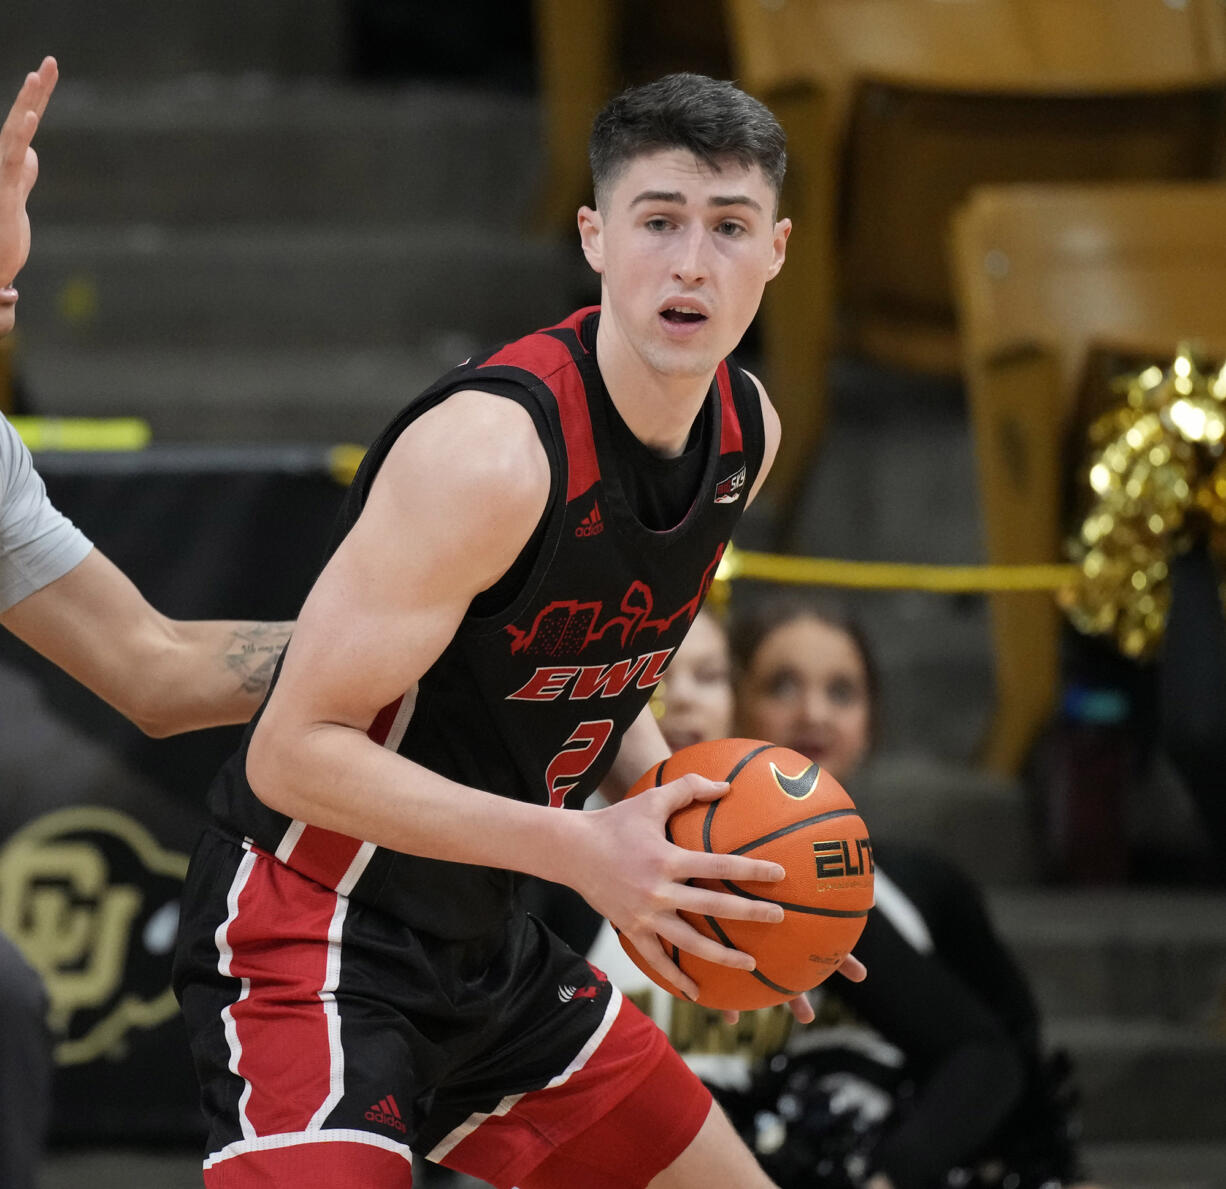 Eastern Washington guard Steele Venters scored 27 points and made a go-ahead 3-pointer with 16 seconds remaining as Eastern Washington beat Washington State 81-74 on Tuesday, March 14, 2023, at Pullman in the first round of the NIT..